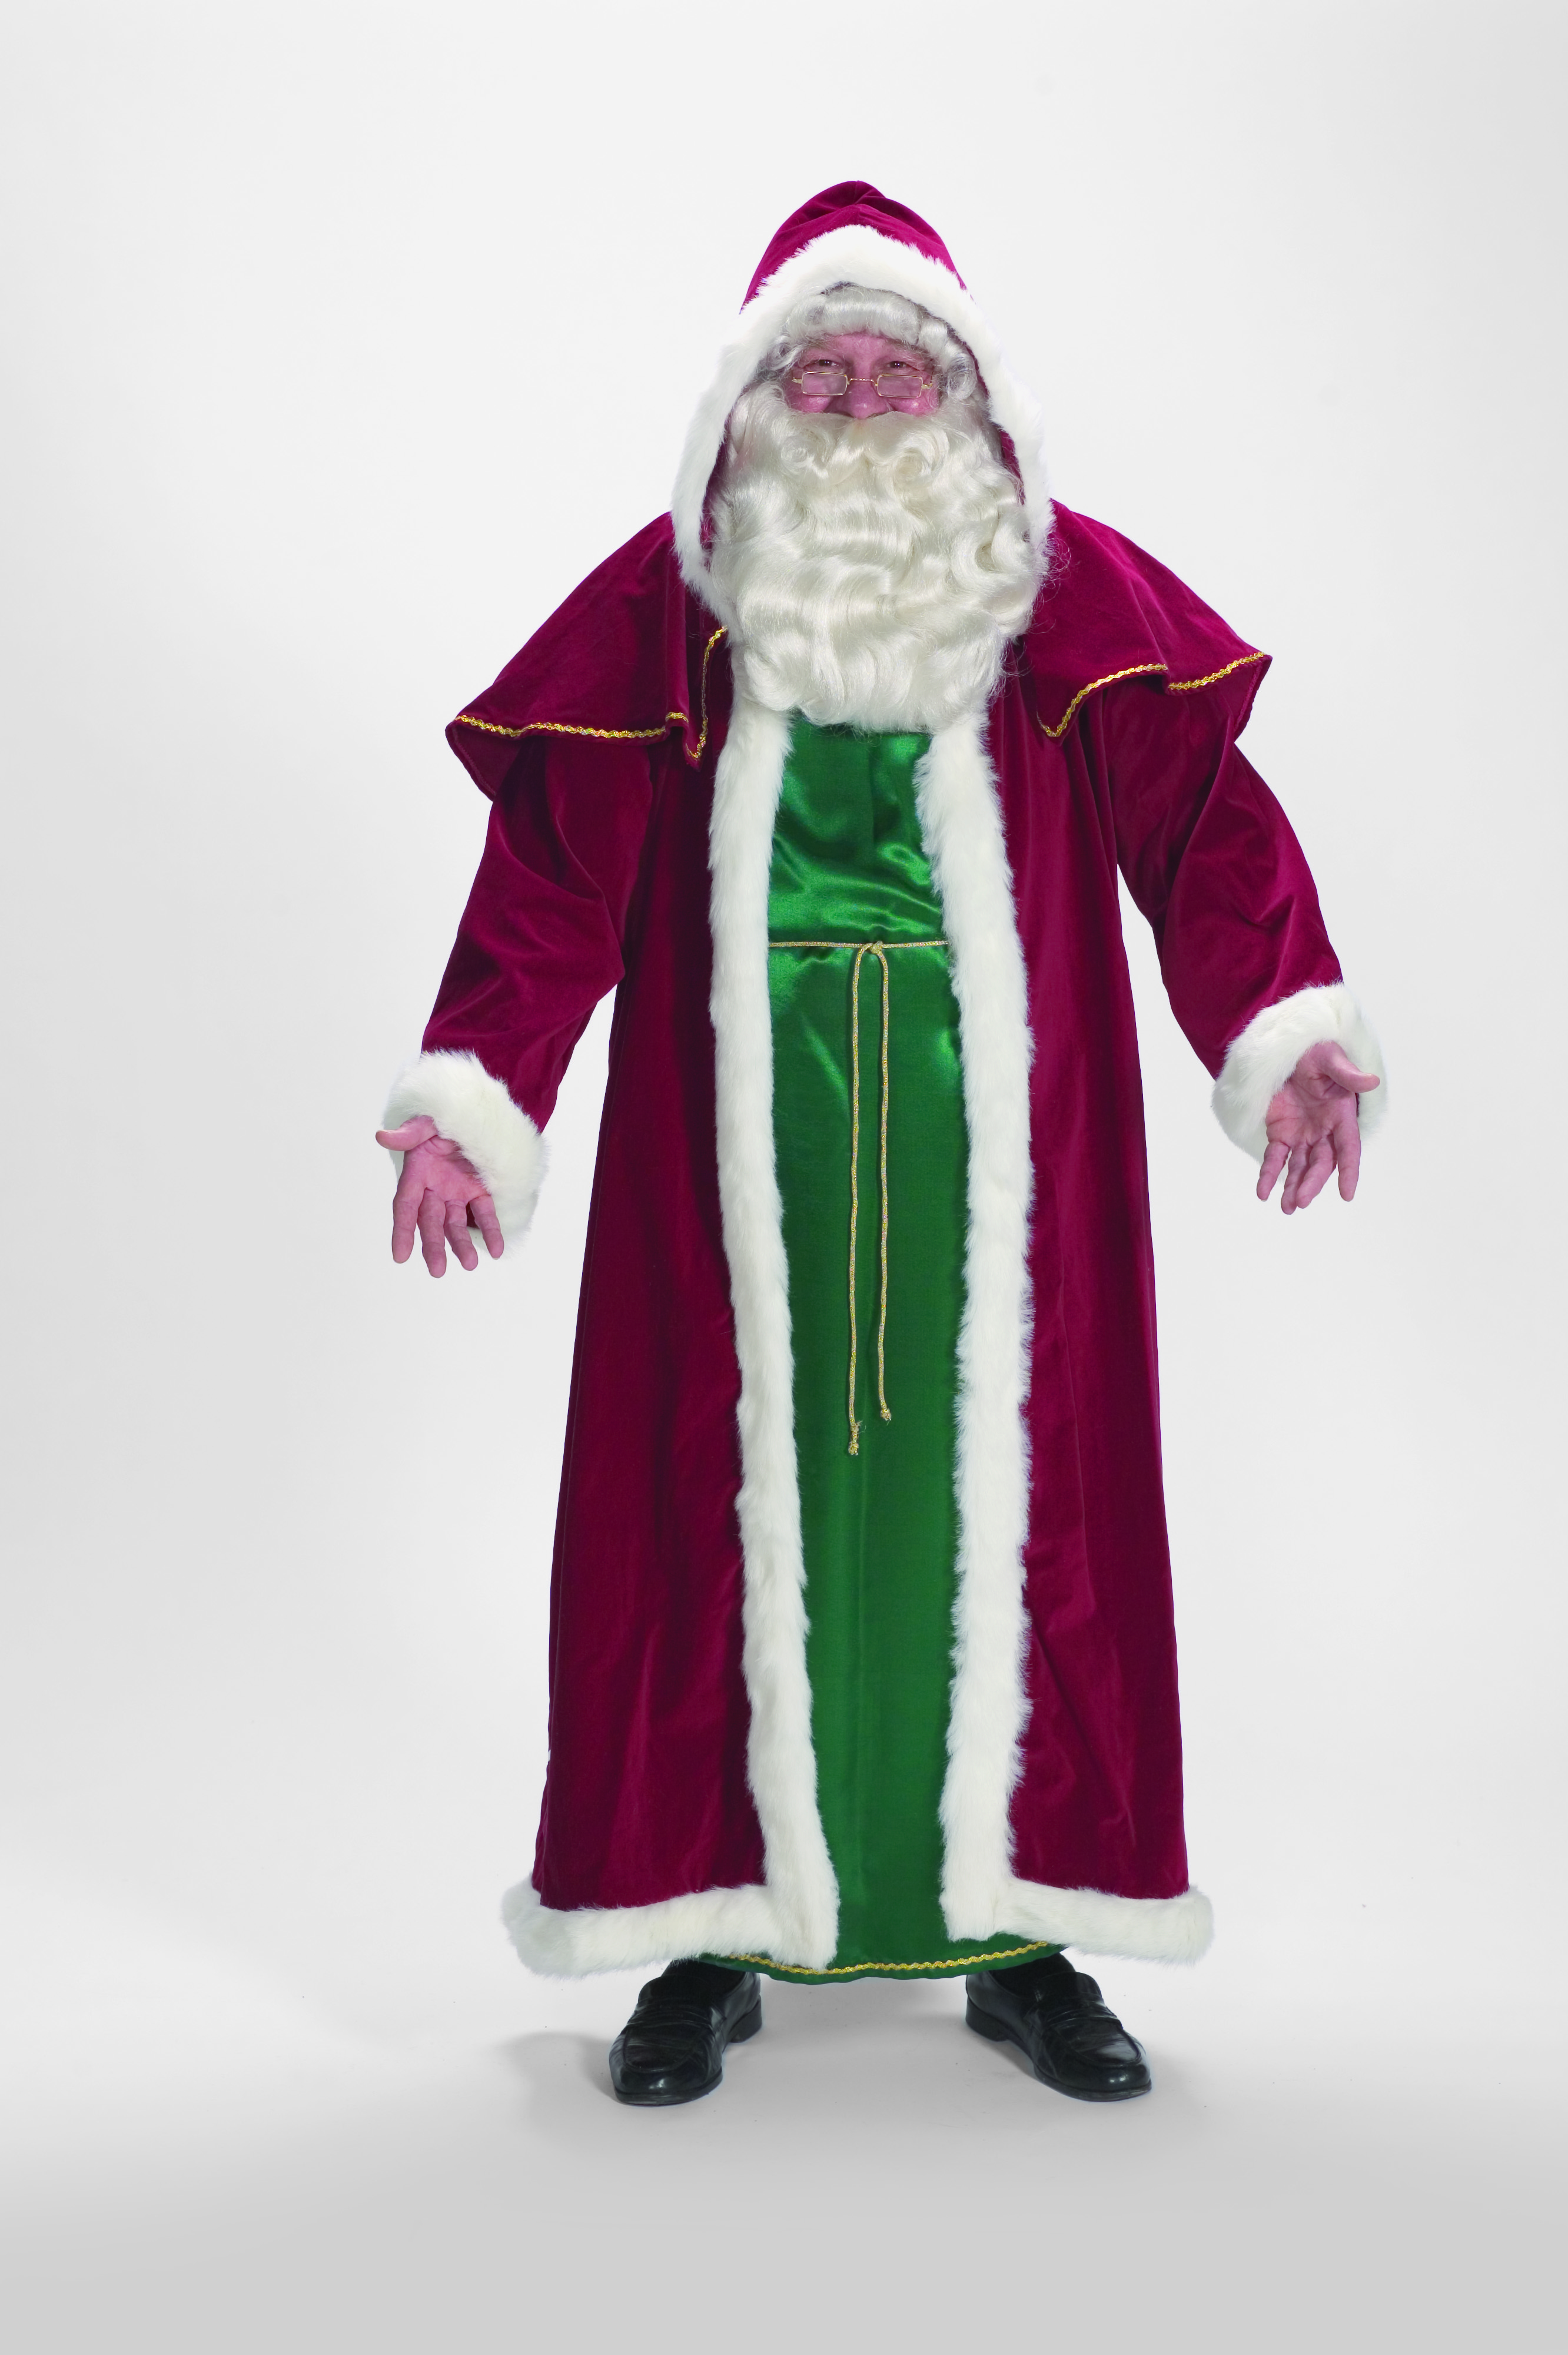 The Costume Center 2-Piece Victorian Santa Christmas Suit - Adult Size-One Size Fits Most